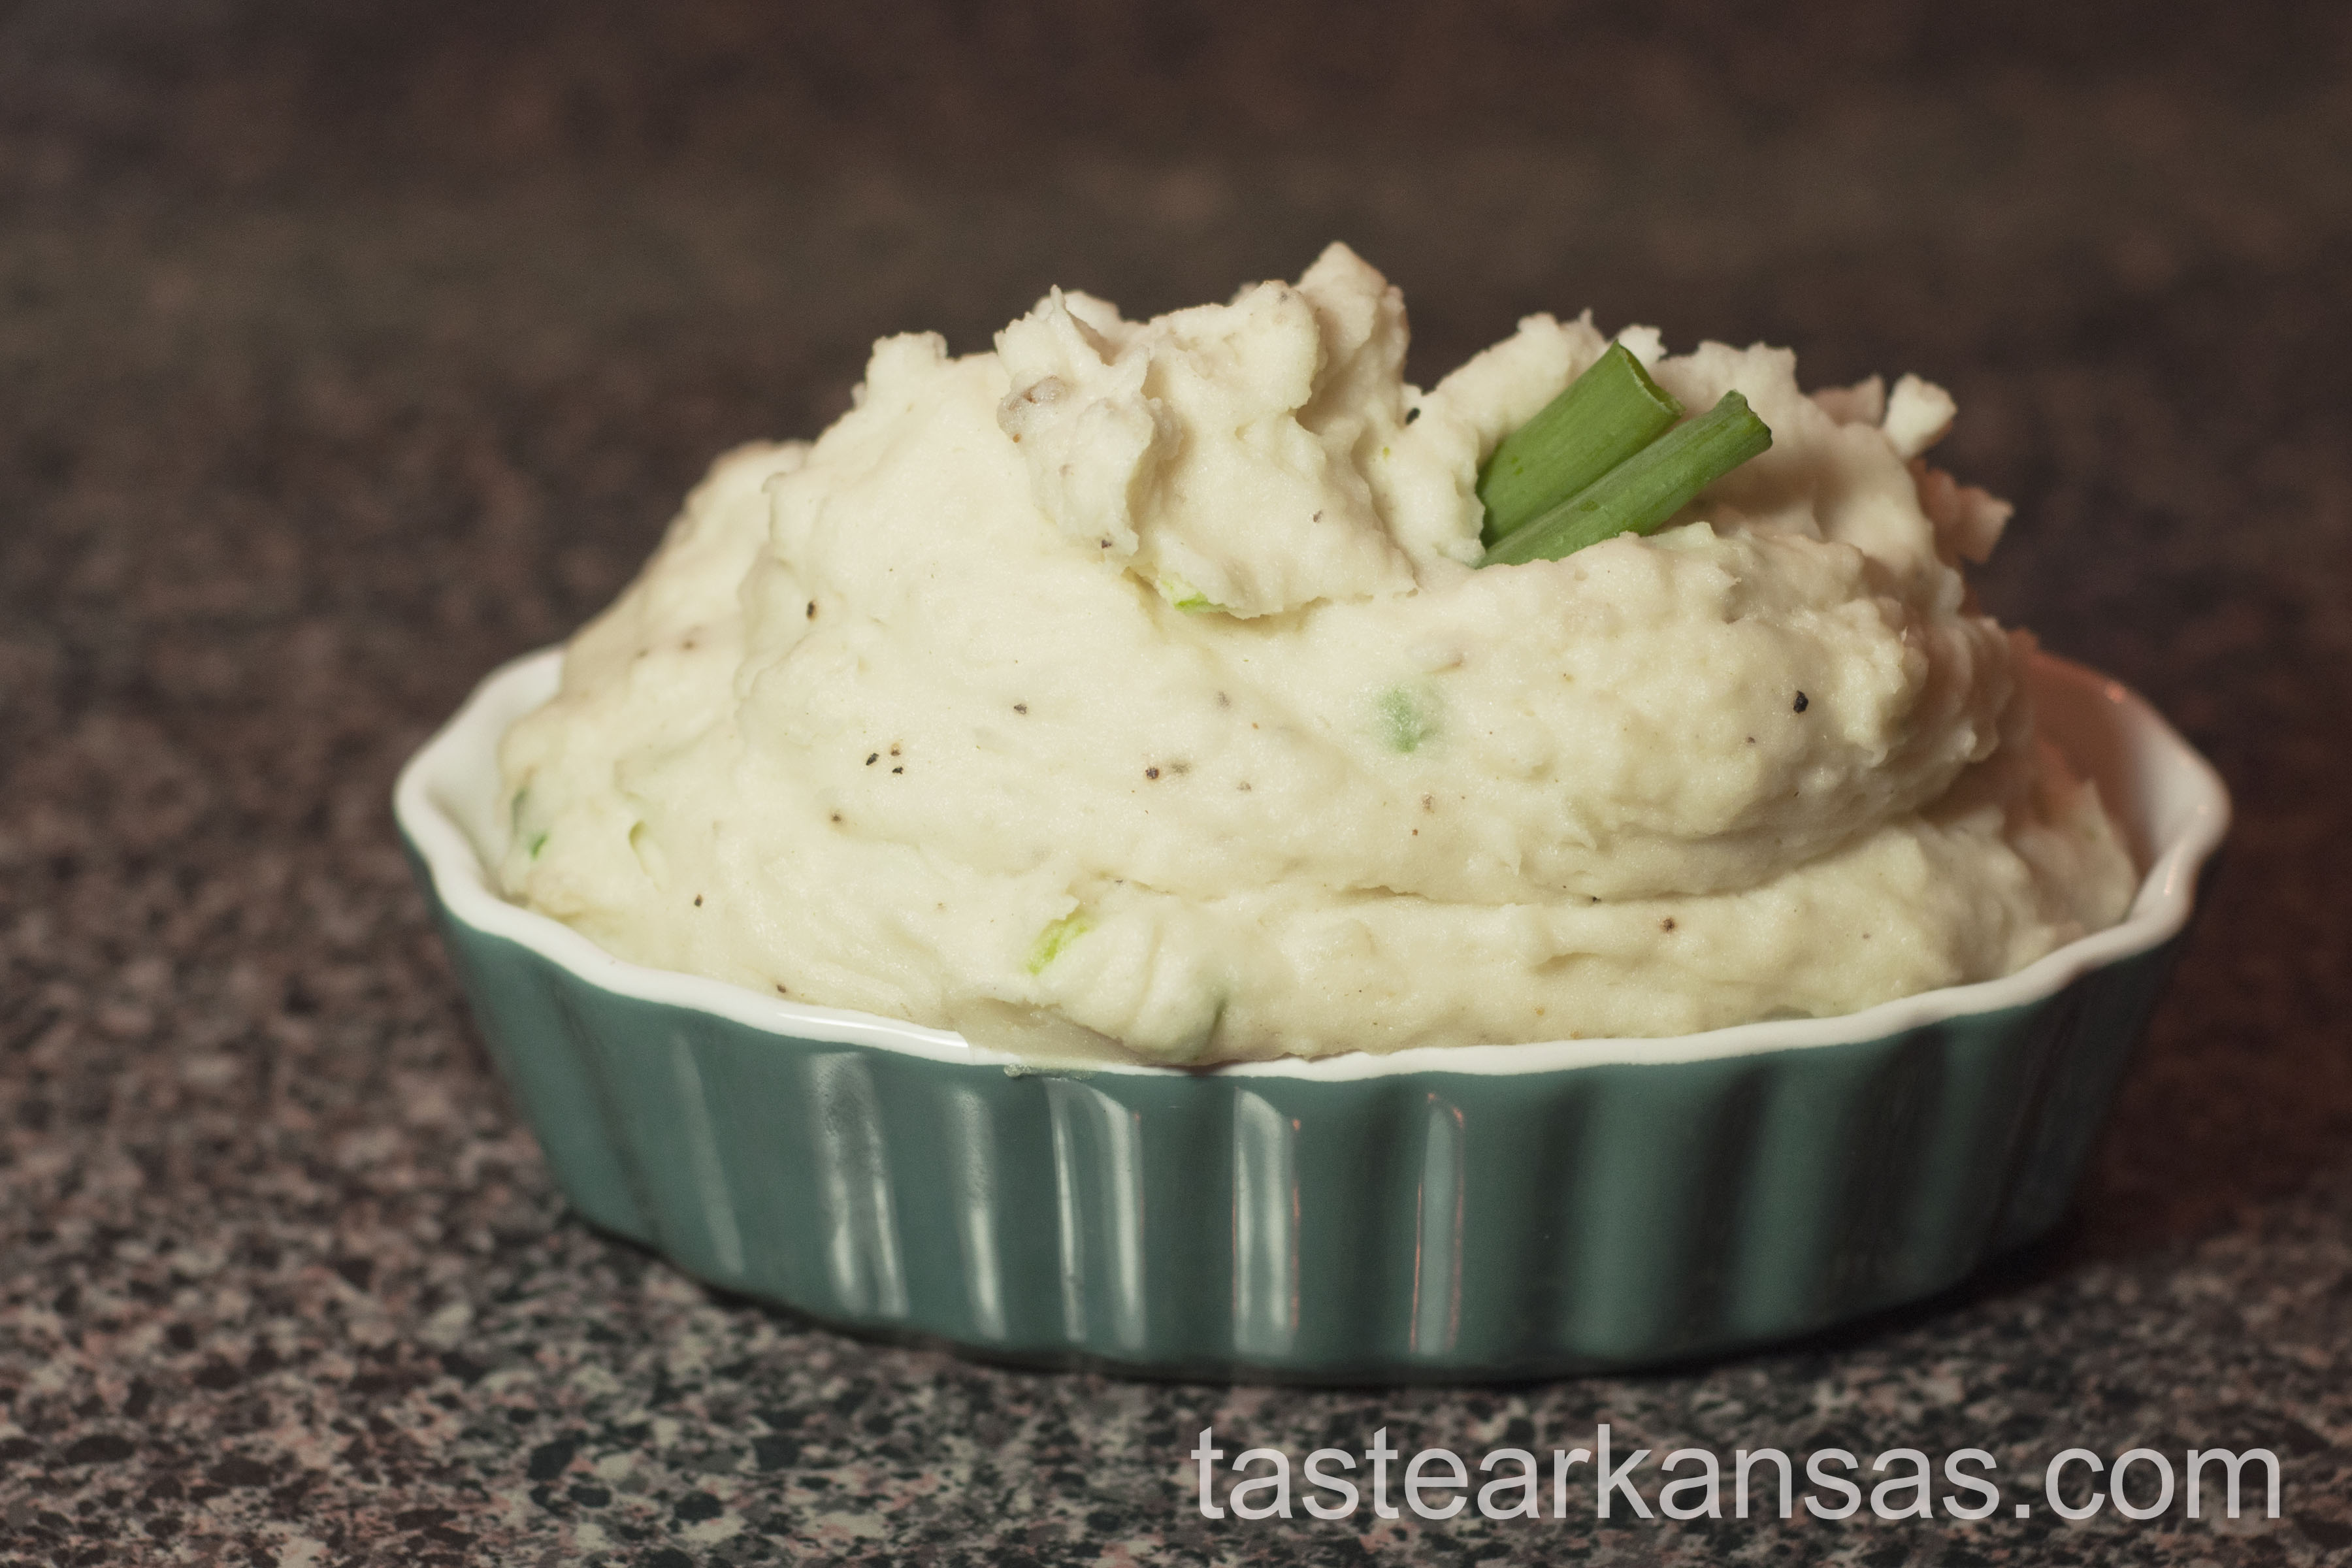 this image is of a robust portion of Garlic Chive Creamed Potatoes